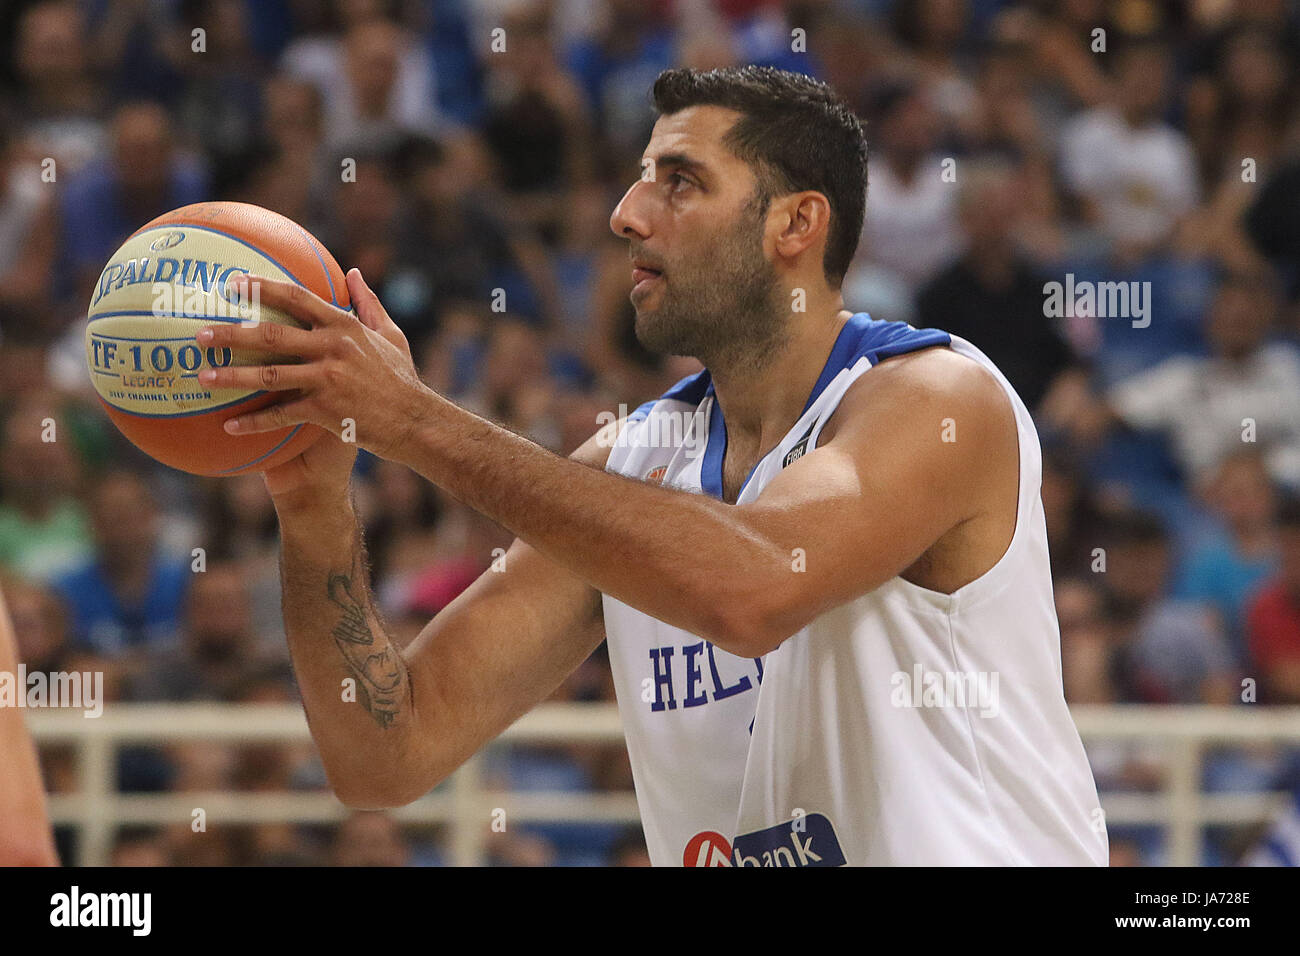 Athens, Greece. 23rd Aug, 2017. Greece's Yannis Bourousis, center, at the Acropolis basketball tournament at the indoor Olympic stadium of Athens Georgia beats Greece 72-71 during the group stage match of the Acropolis International Basketball Tournament. Credit: SOPA Images Limited/Alamy Live News Stock Photo